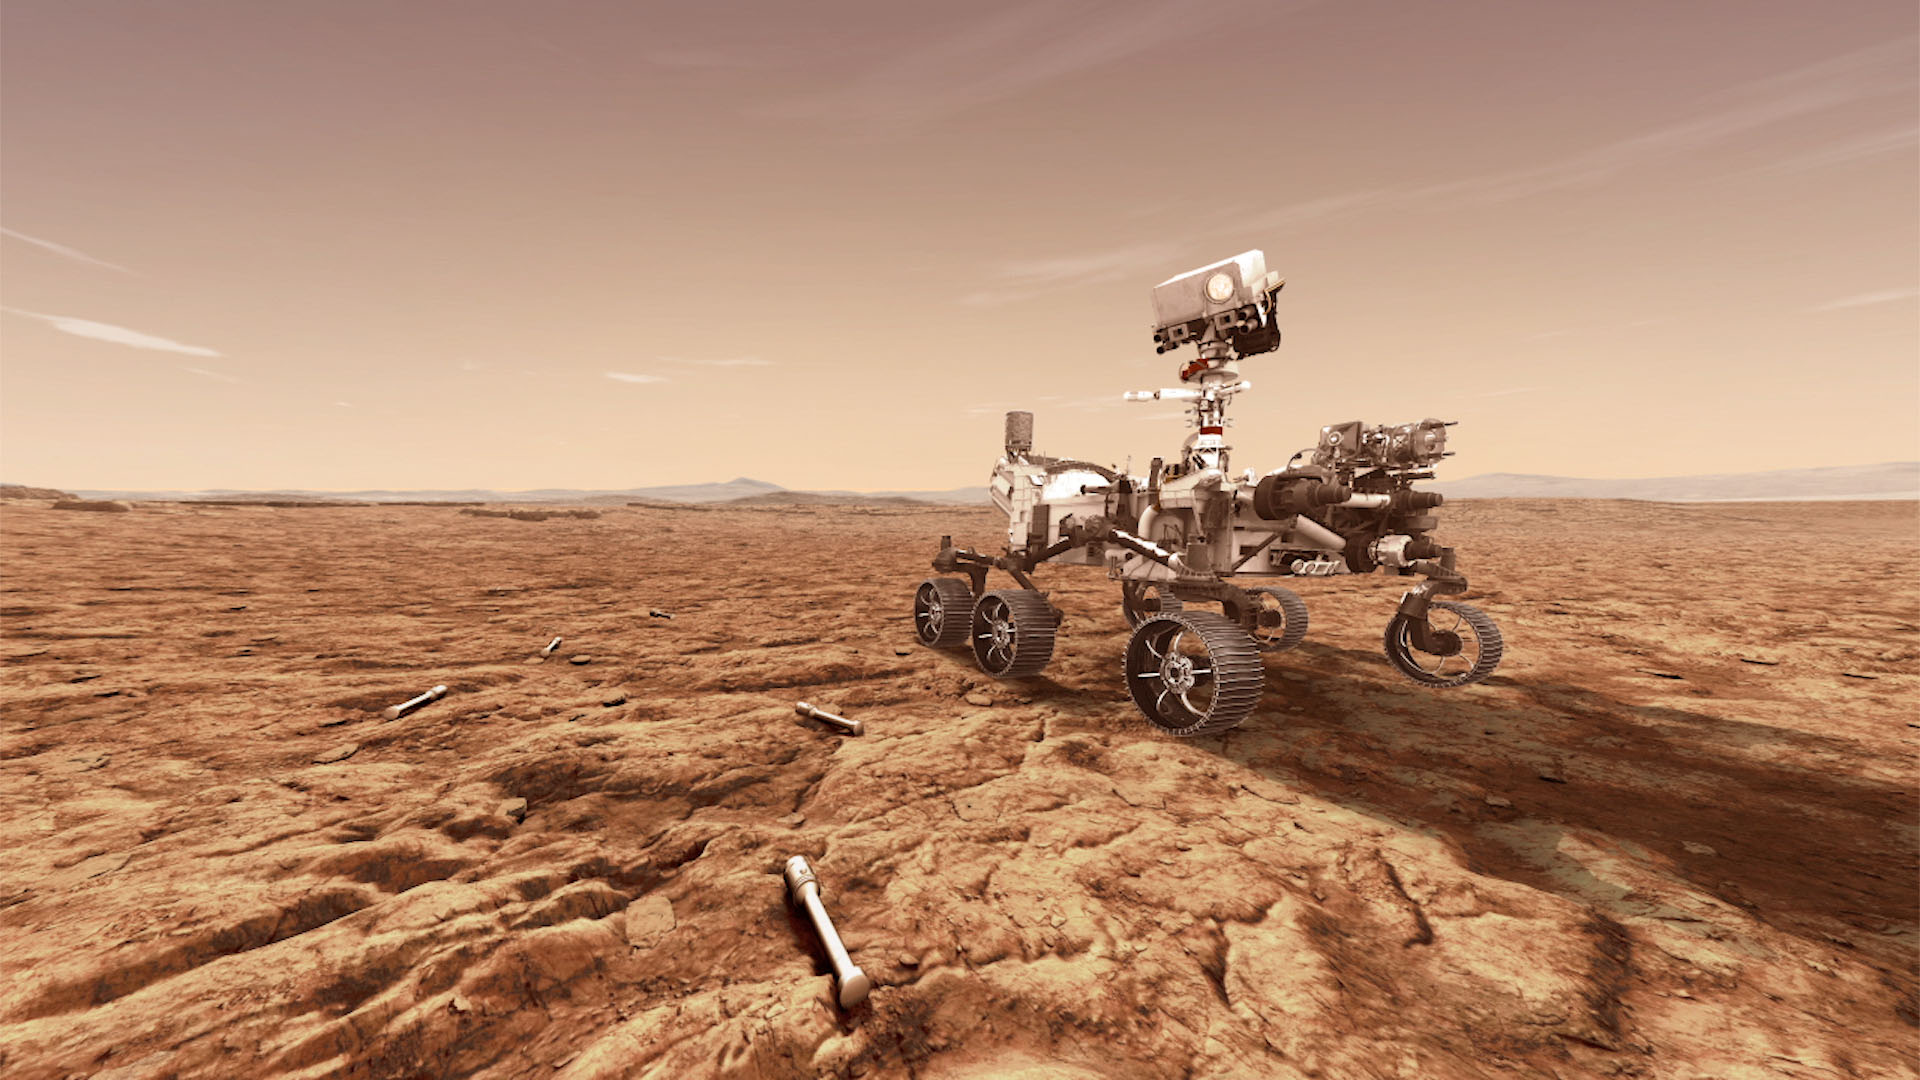 NASA’s next Mars rover will land in less than 100 days